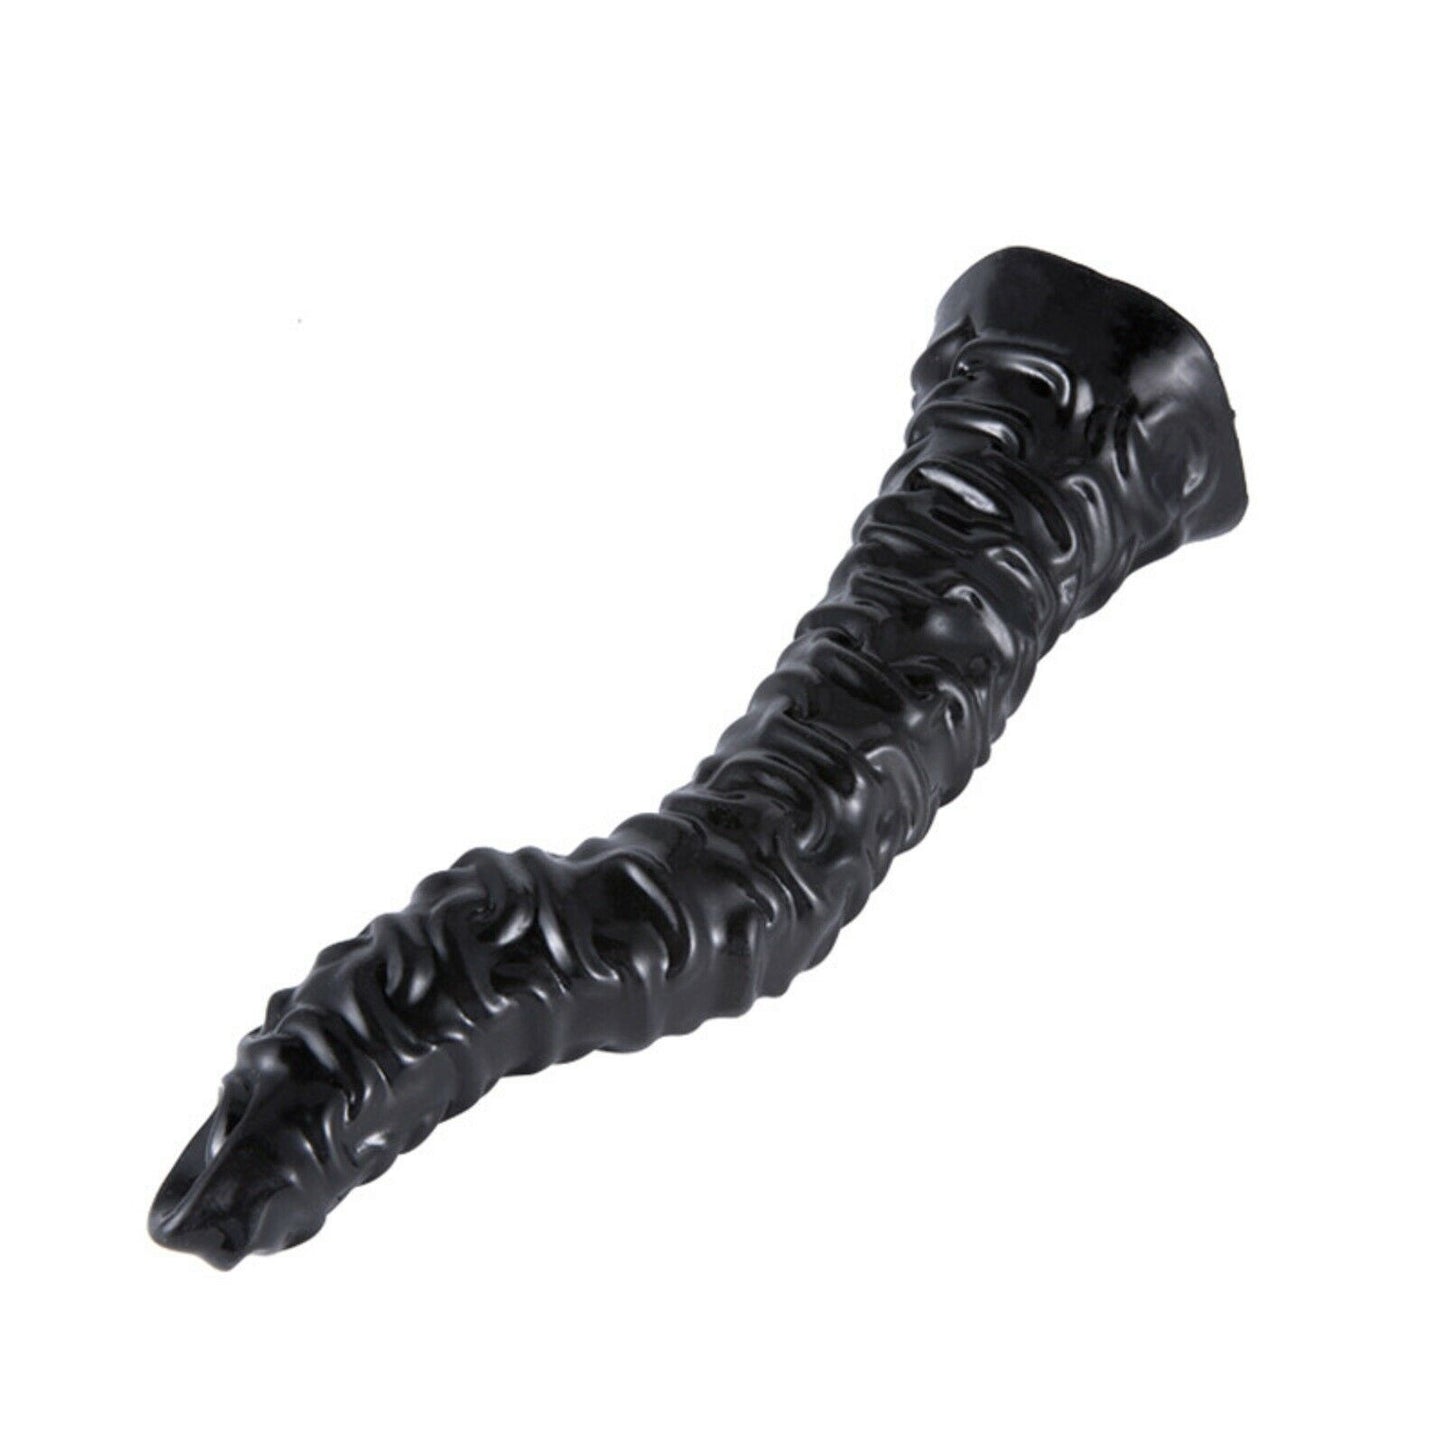 14.2" Realistic BIG Monster Dildo Dong MASSIVE Fantasy Dragon Cock Adult Sex Toy